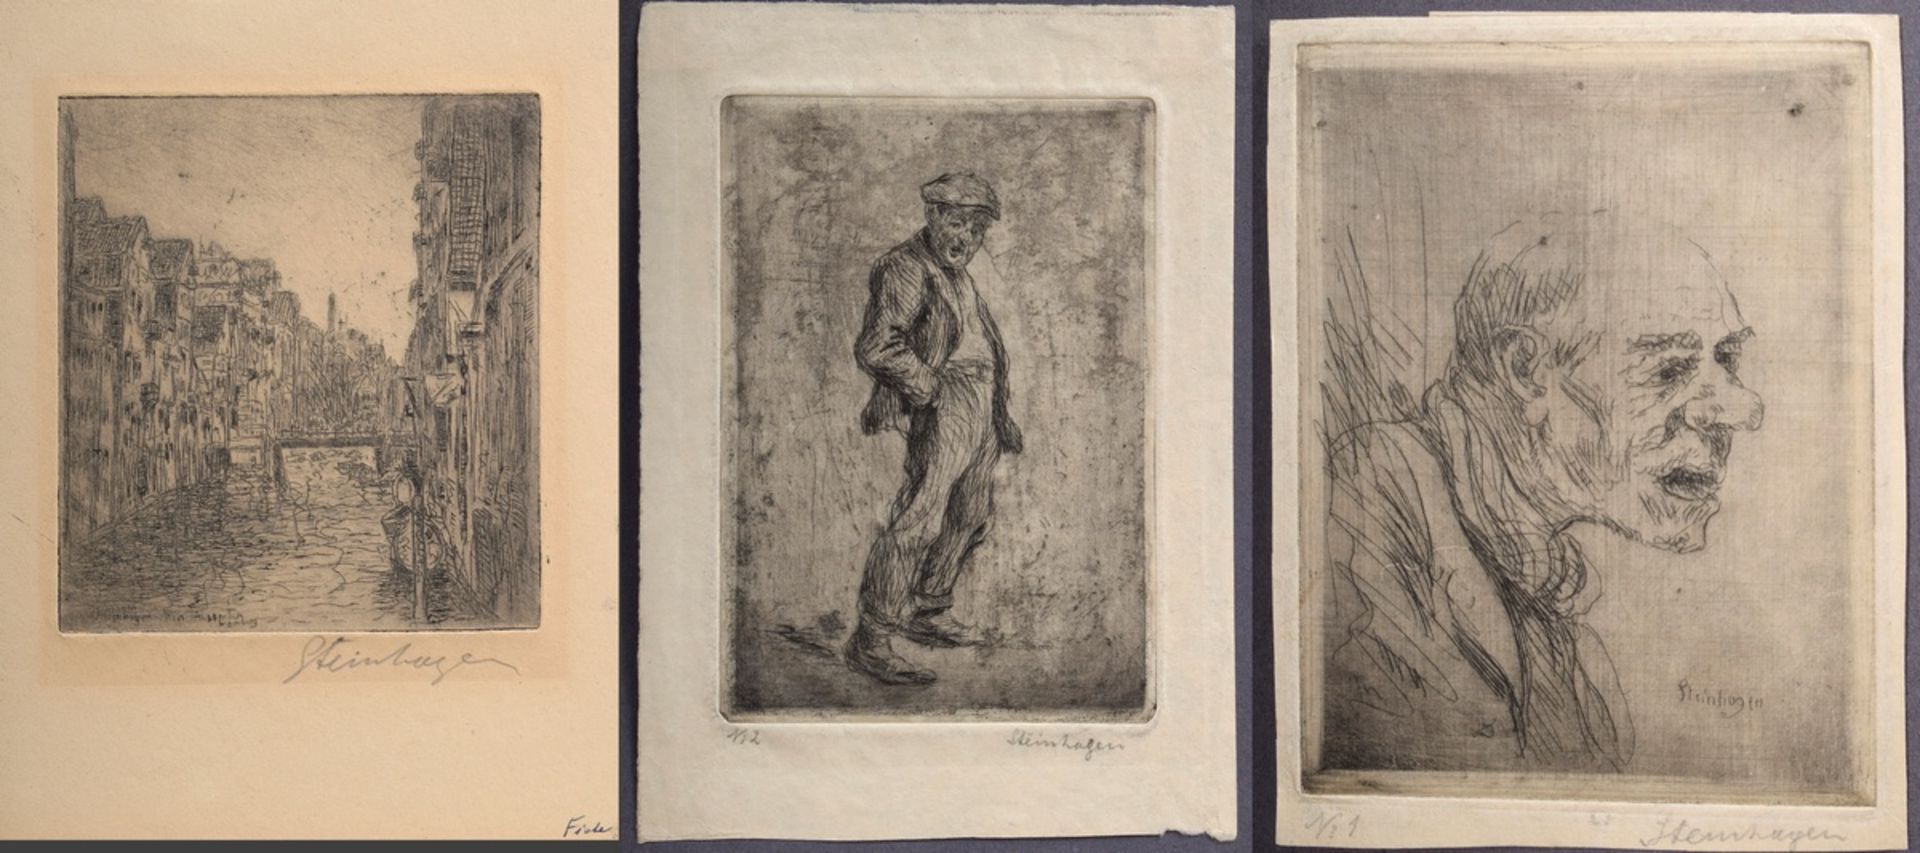 3 Steinhagen, Heinrich (1880-1948) "Hamburg" and "Types", etchings, some signed and titled on the p